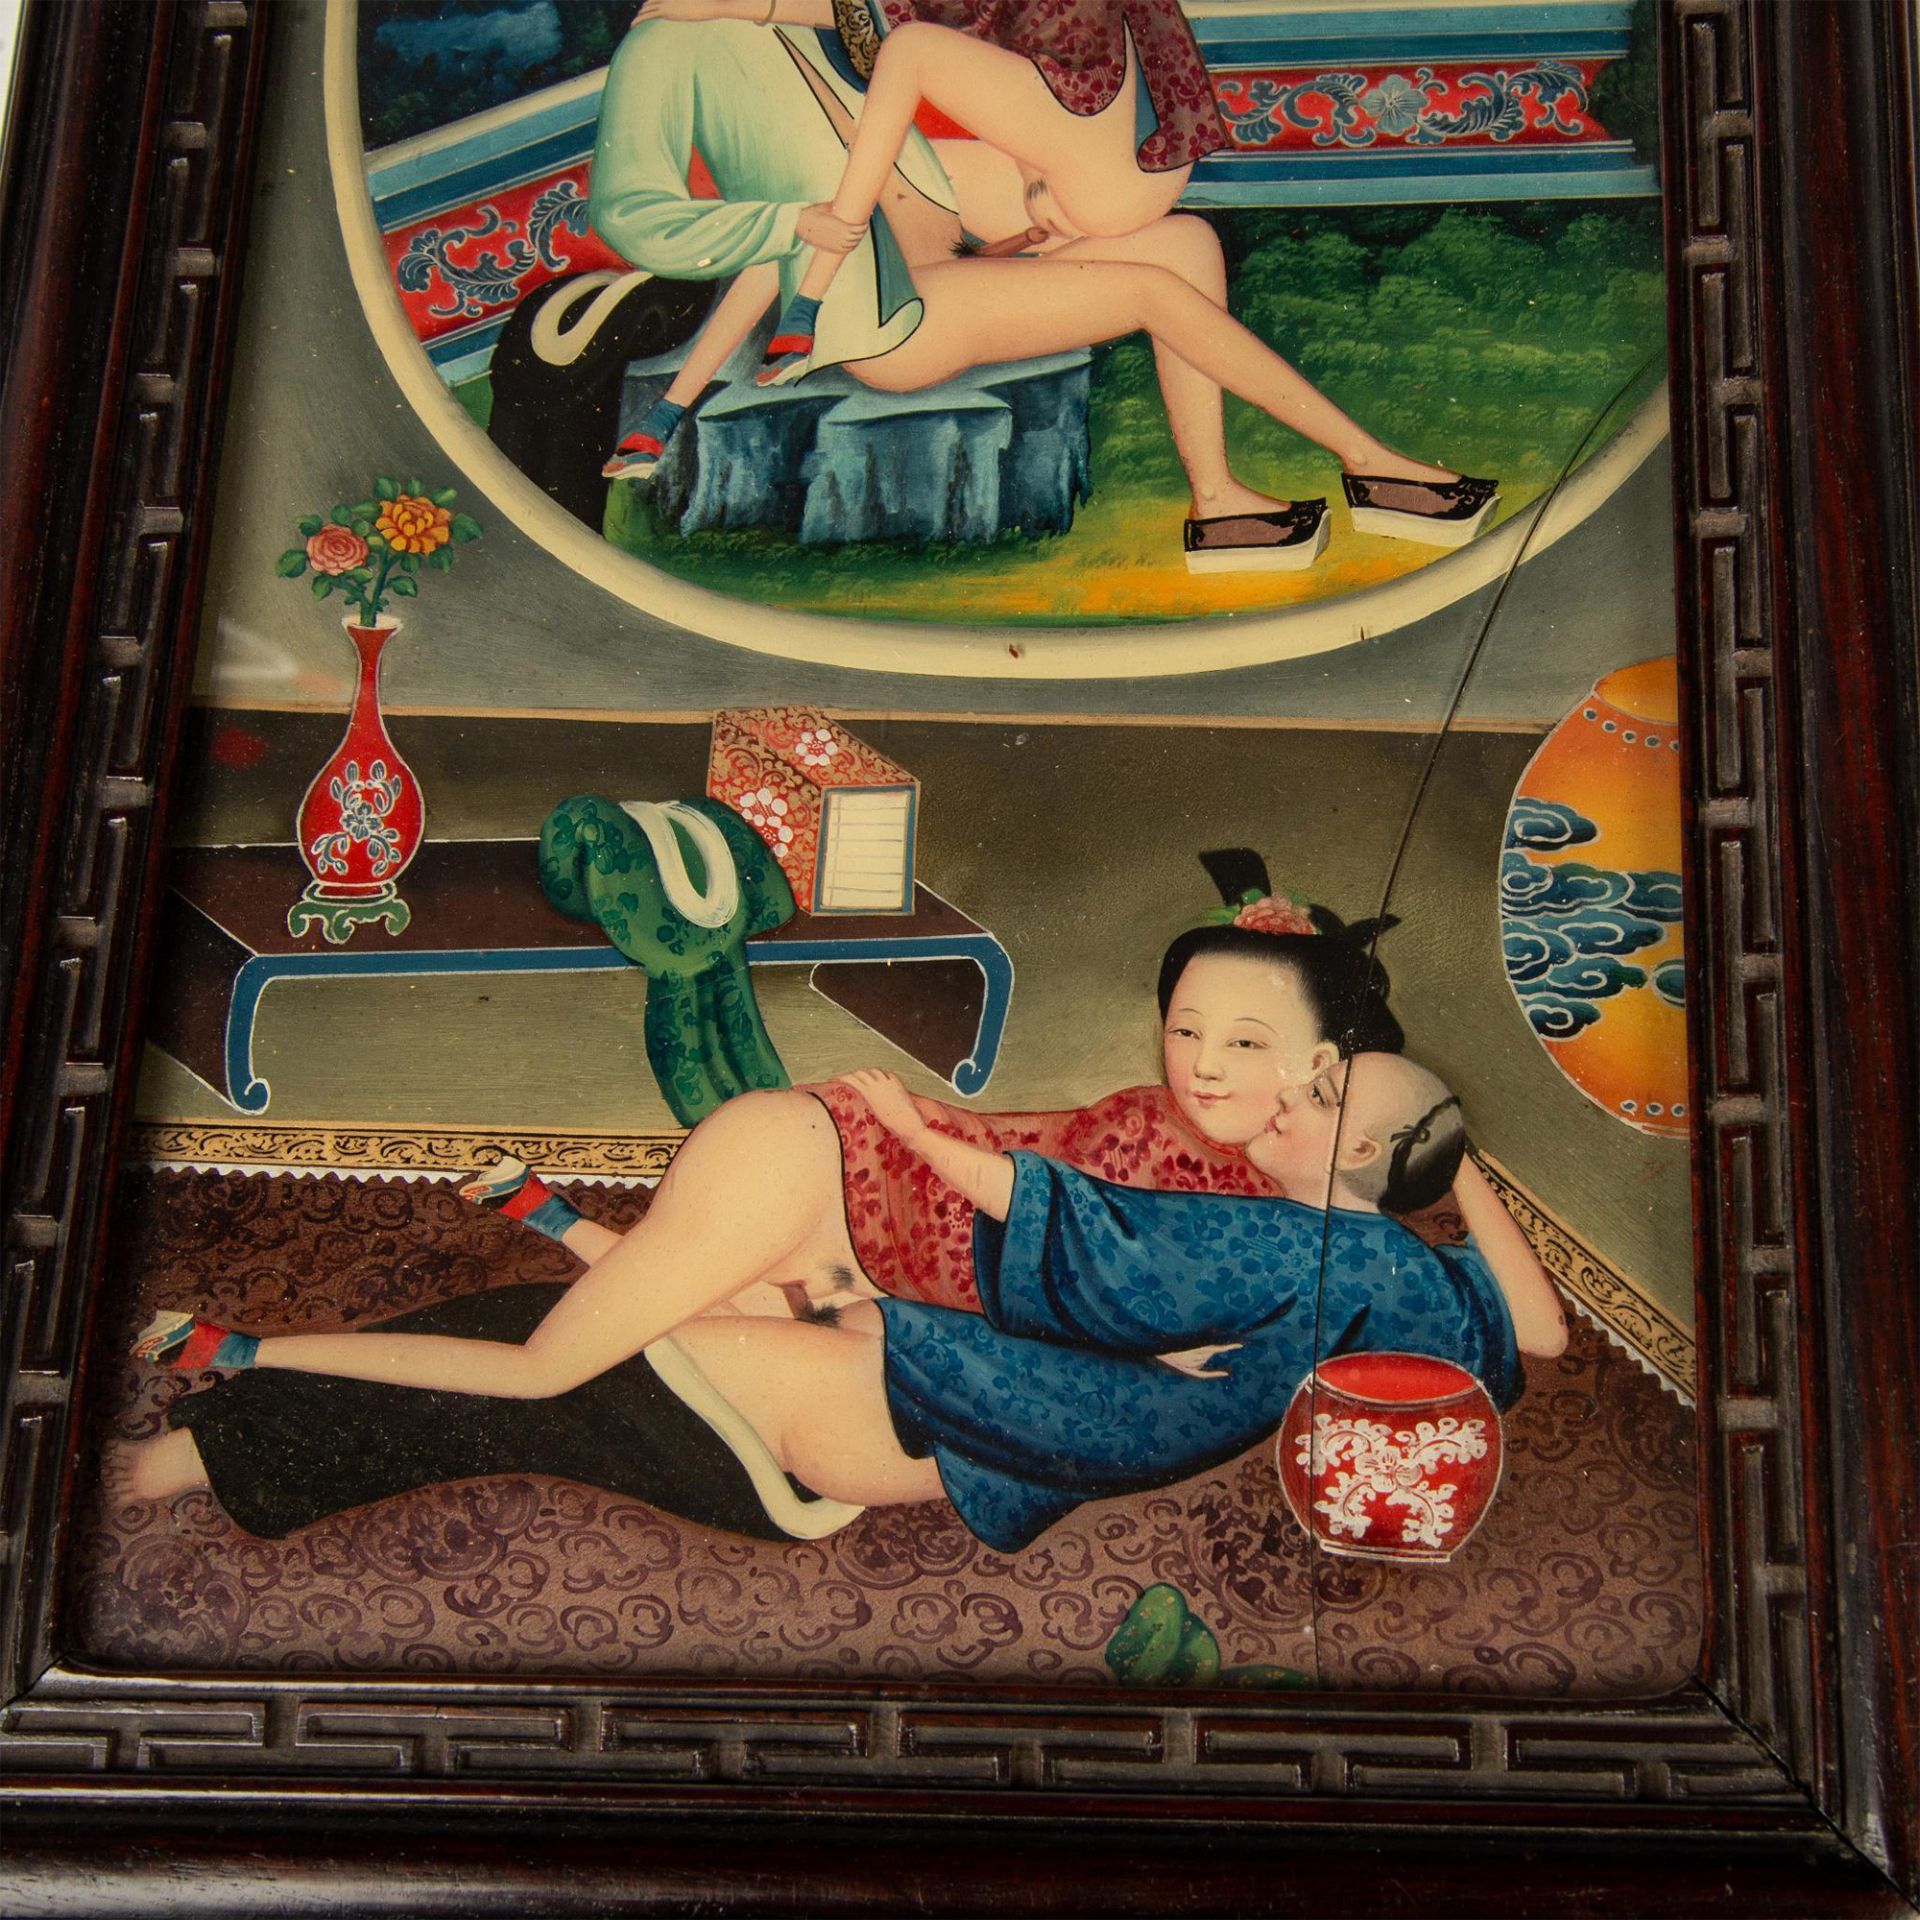 Antique Chinese Erotic Reverse Glass Painting - Image 3 of 4